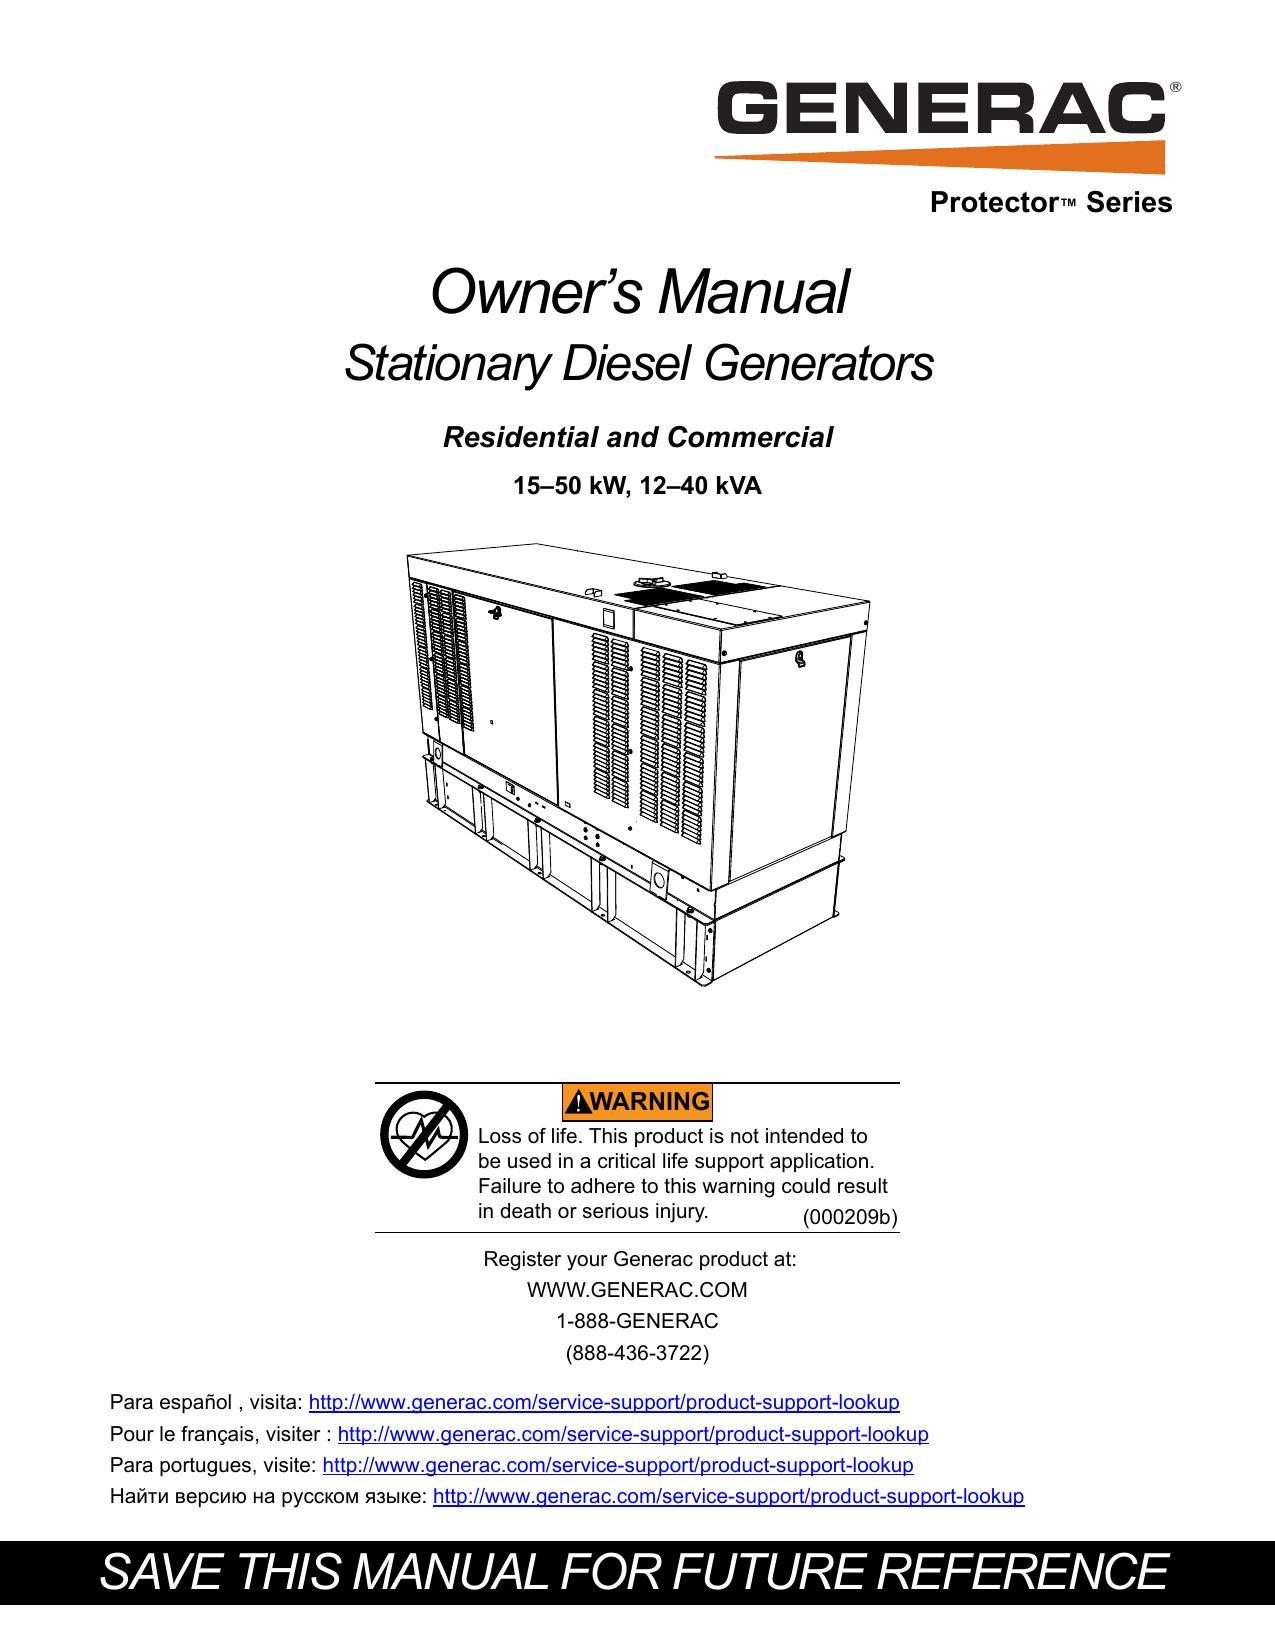 owners-manual-for-stationary-diesel-generators-residential-and-commercial-15-50-kw-12-40-kva.pdf